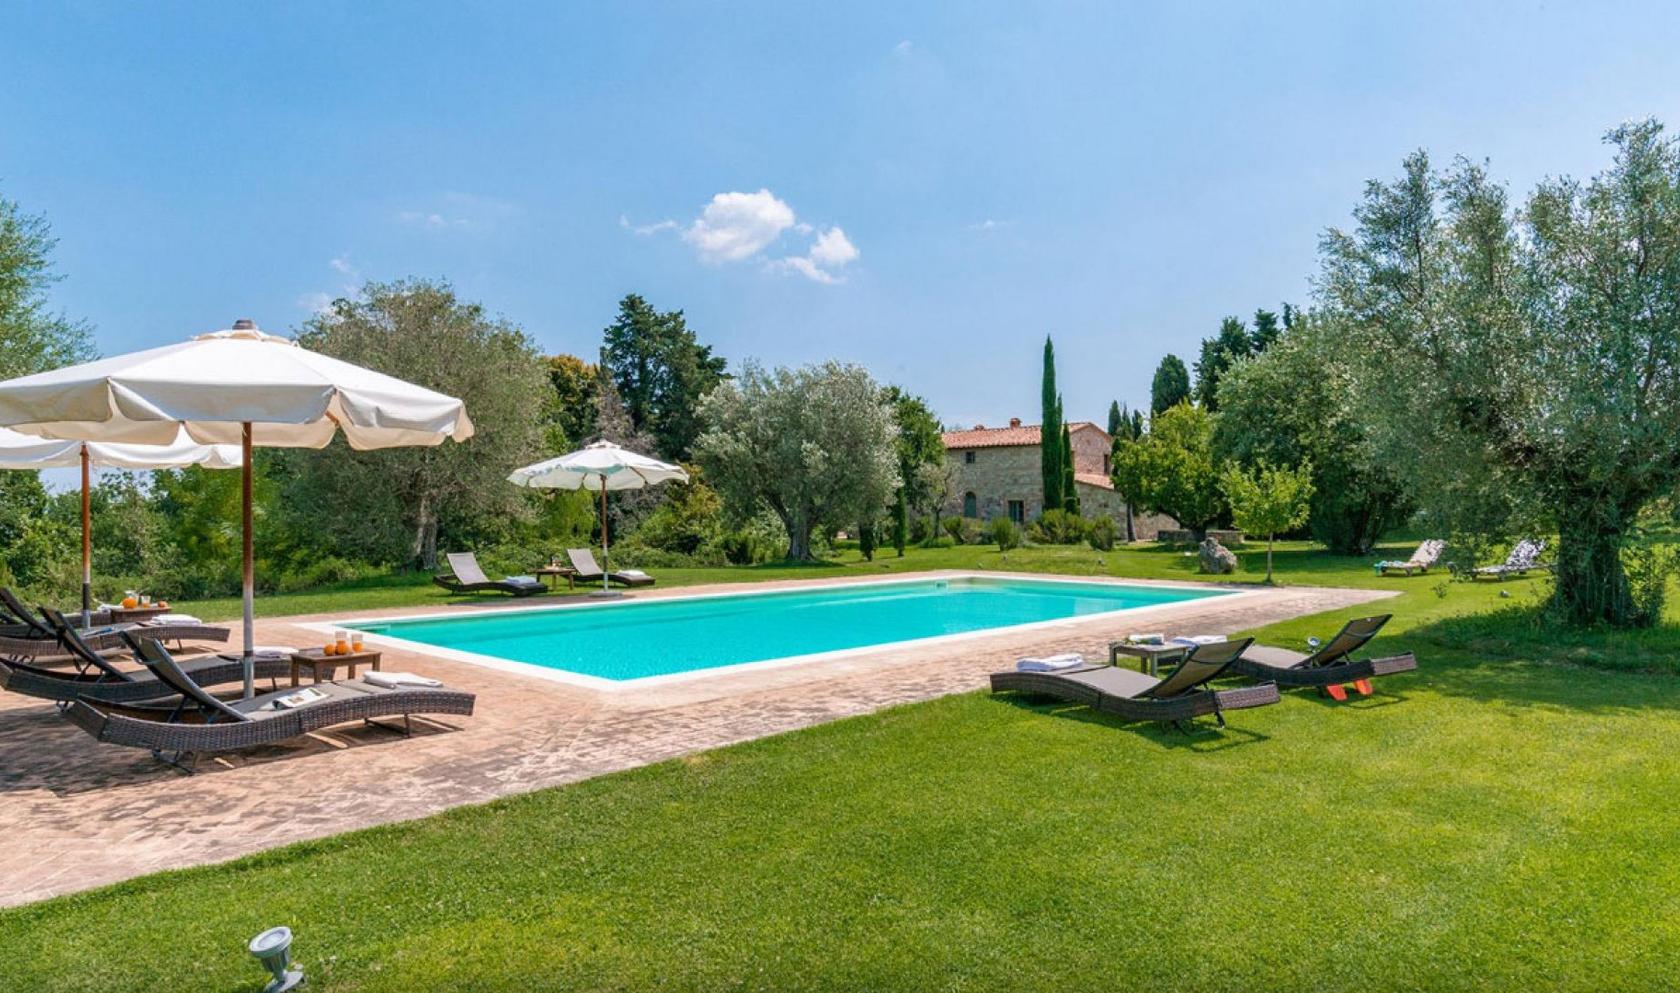 Toscana Immobiliare - Restored country house for sale in Cetona, Tuscany, Siena